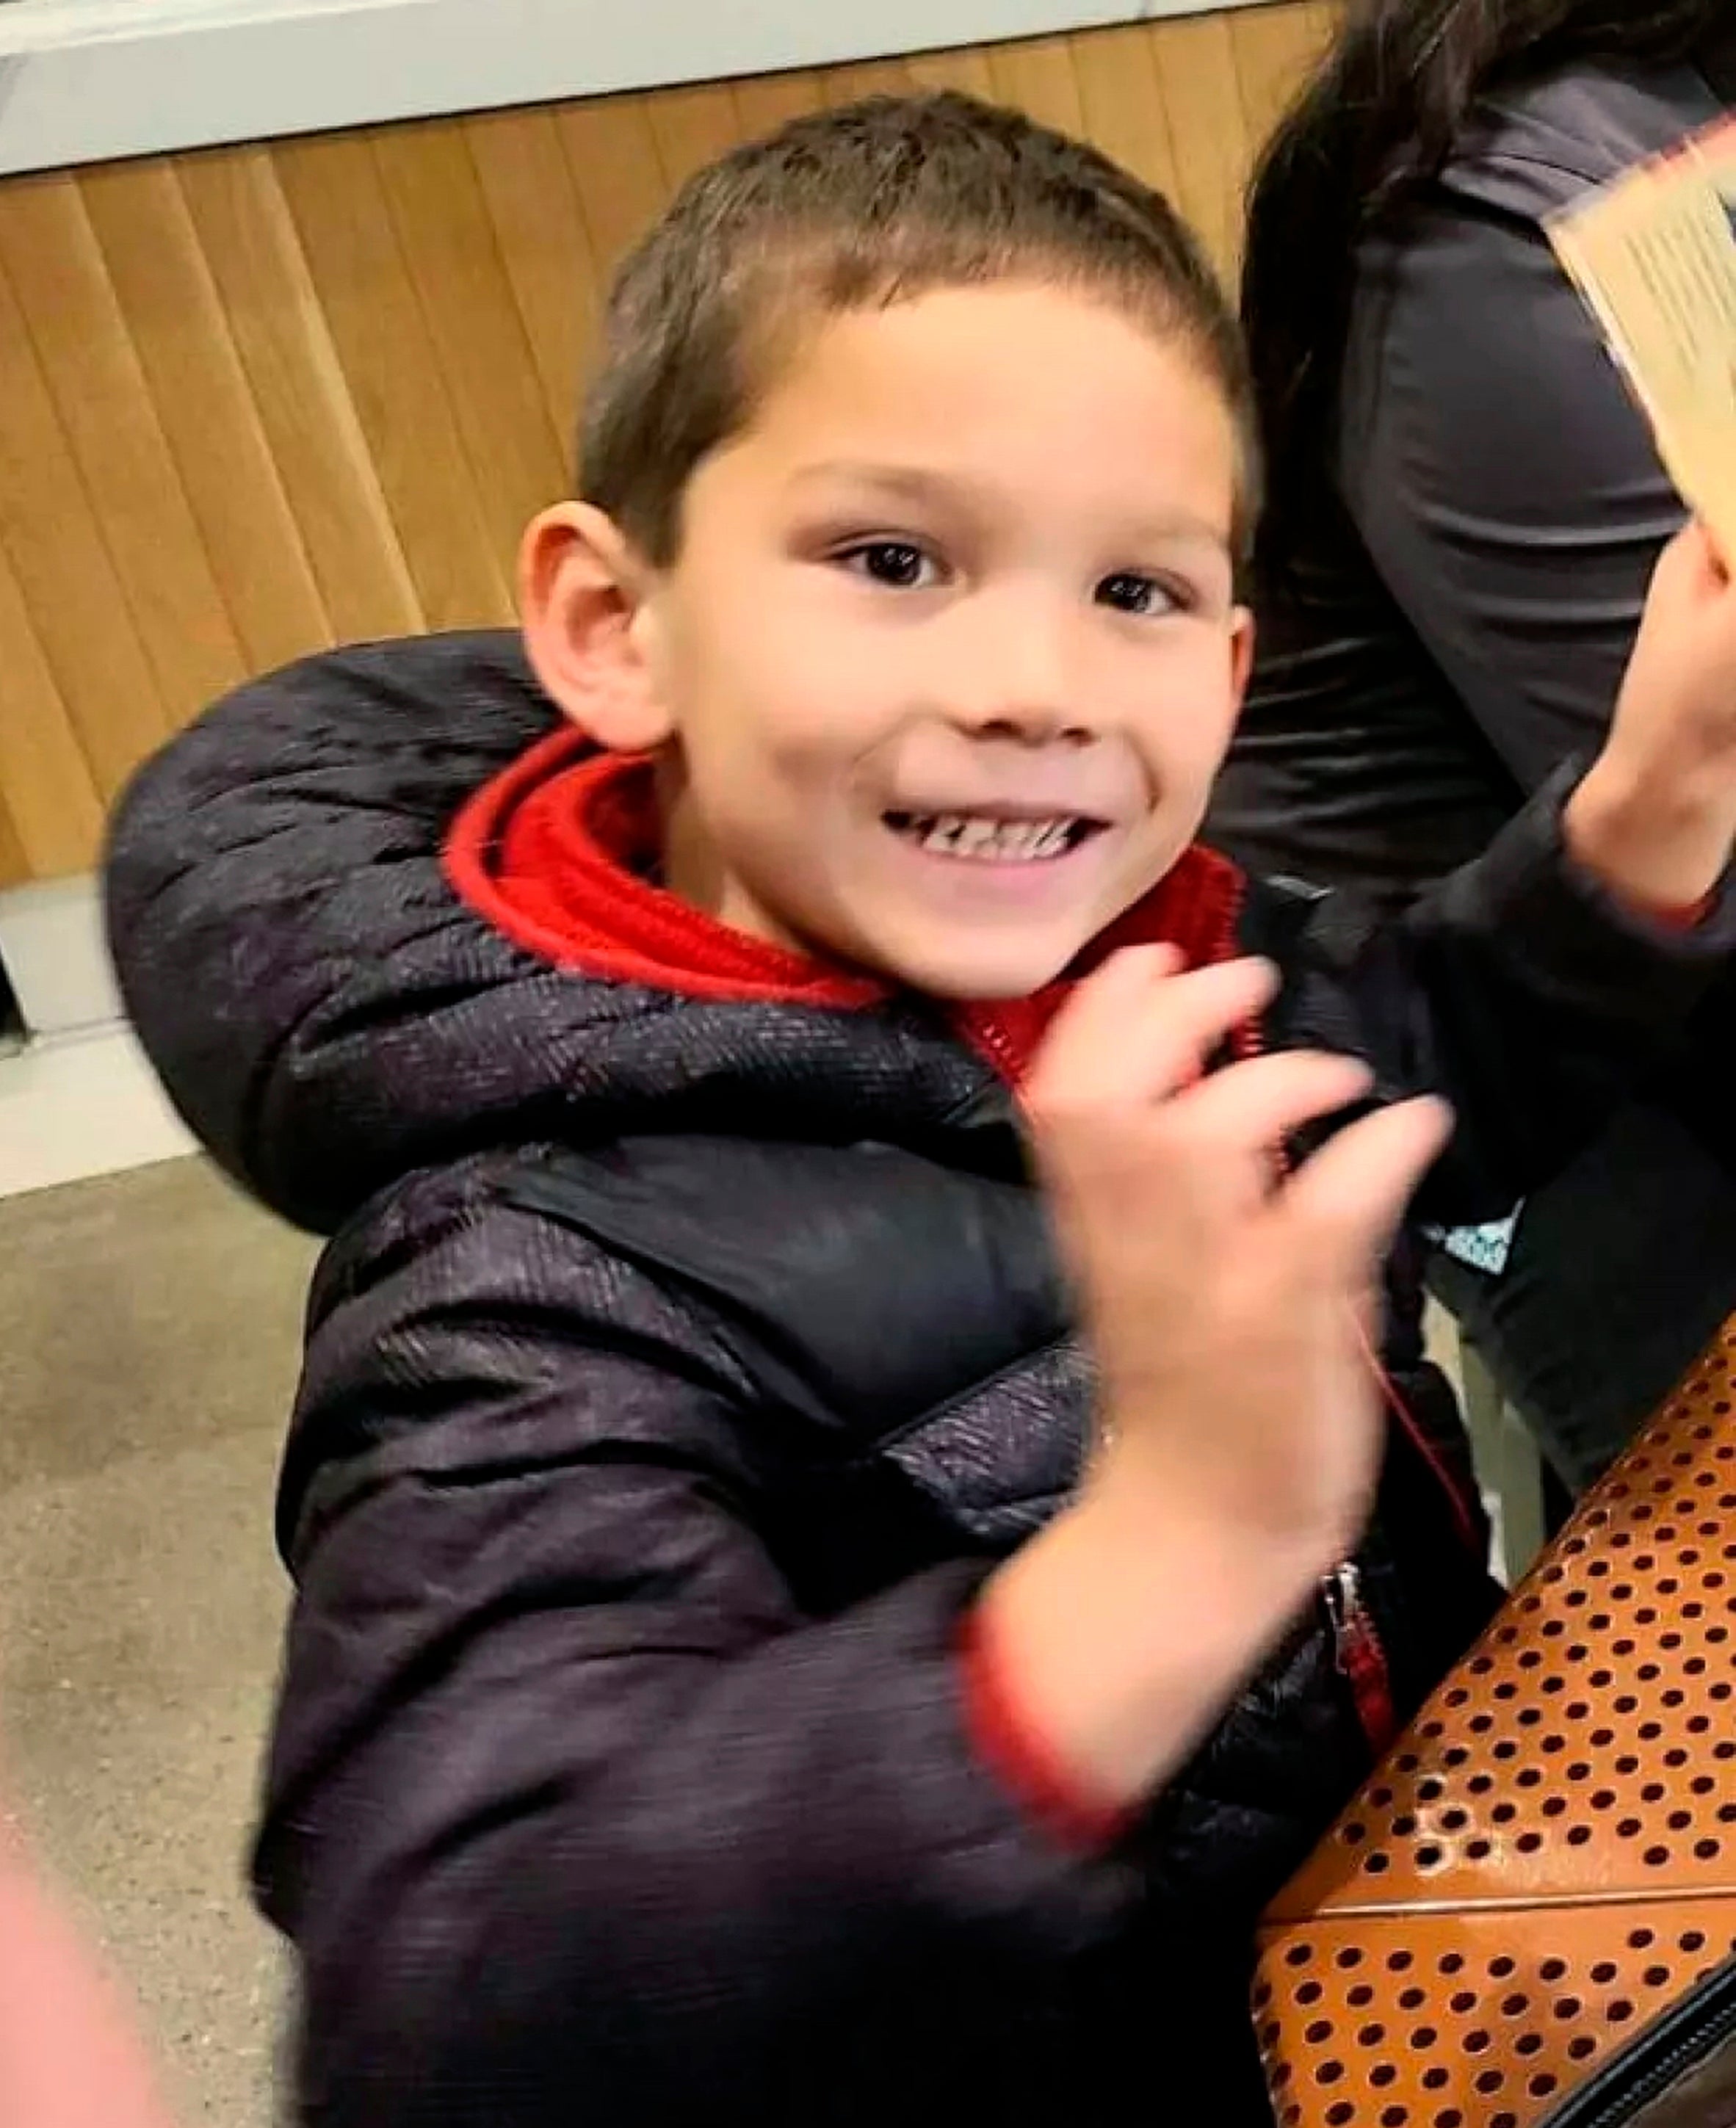 California Storms Missing Boy